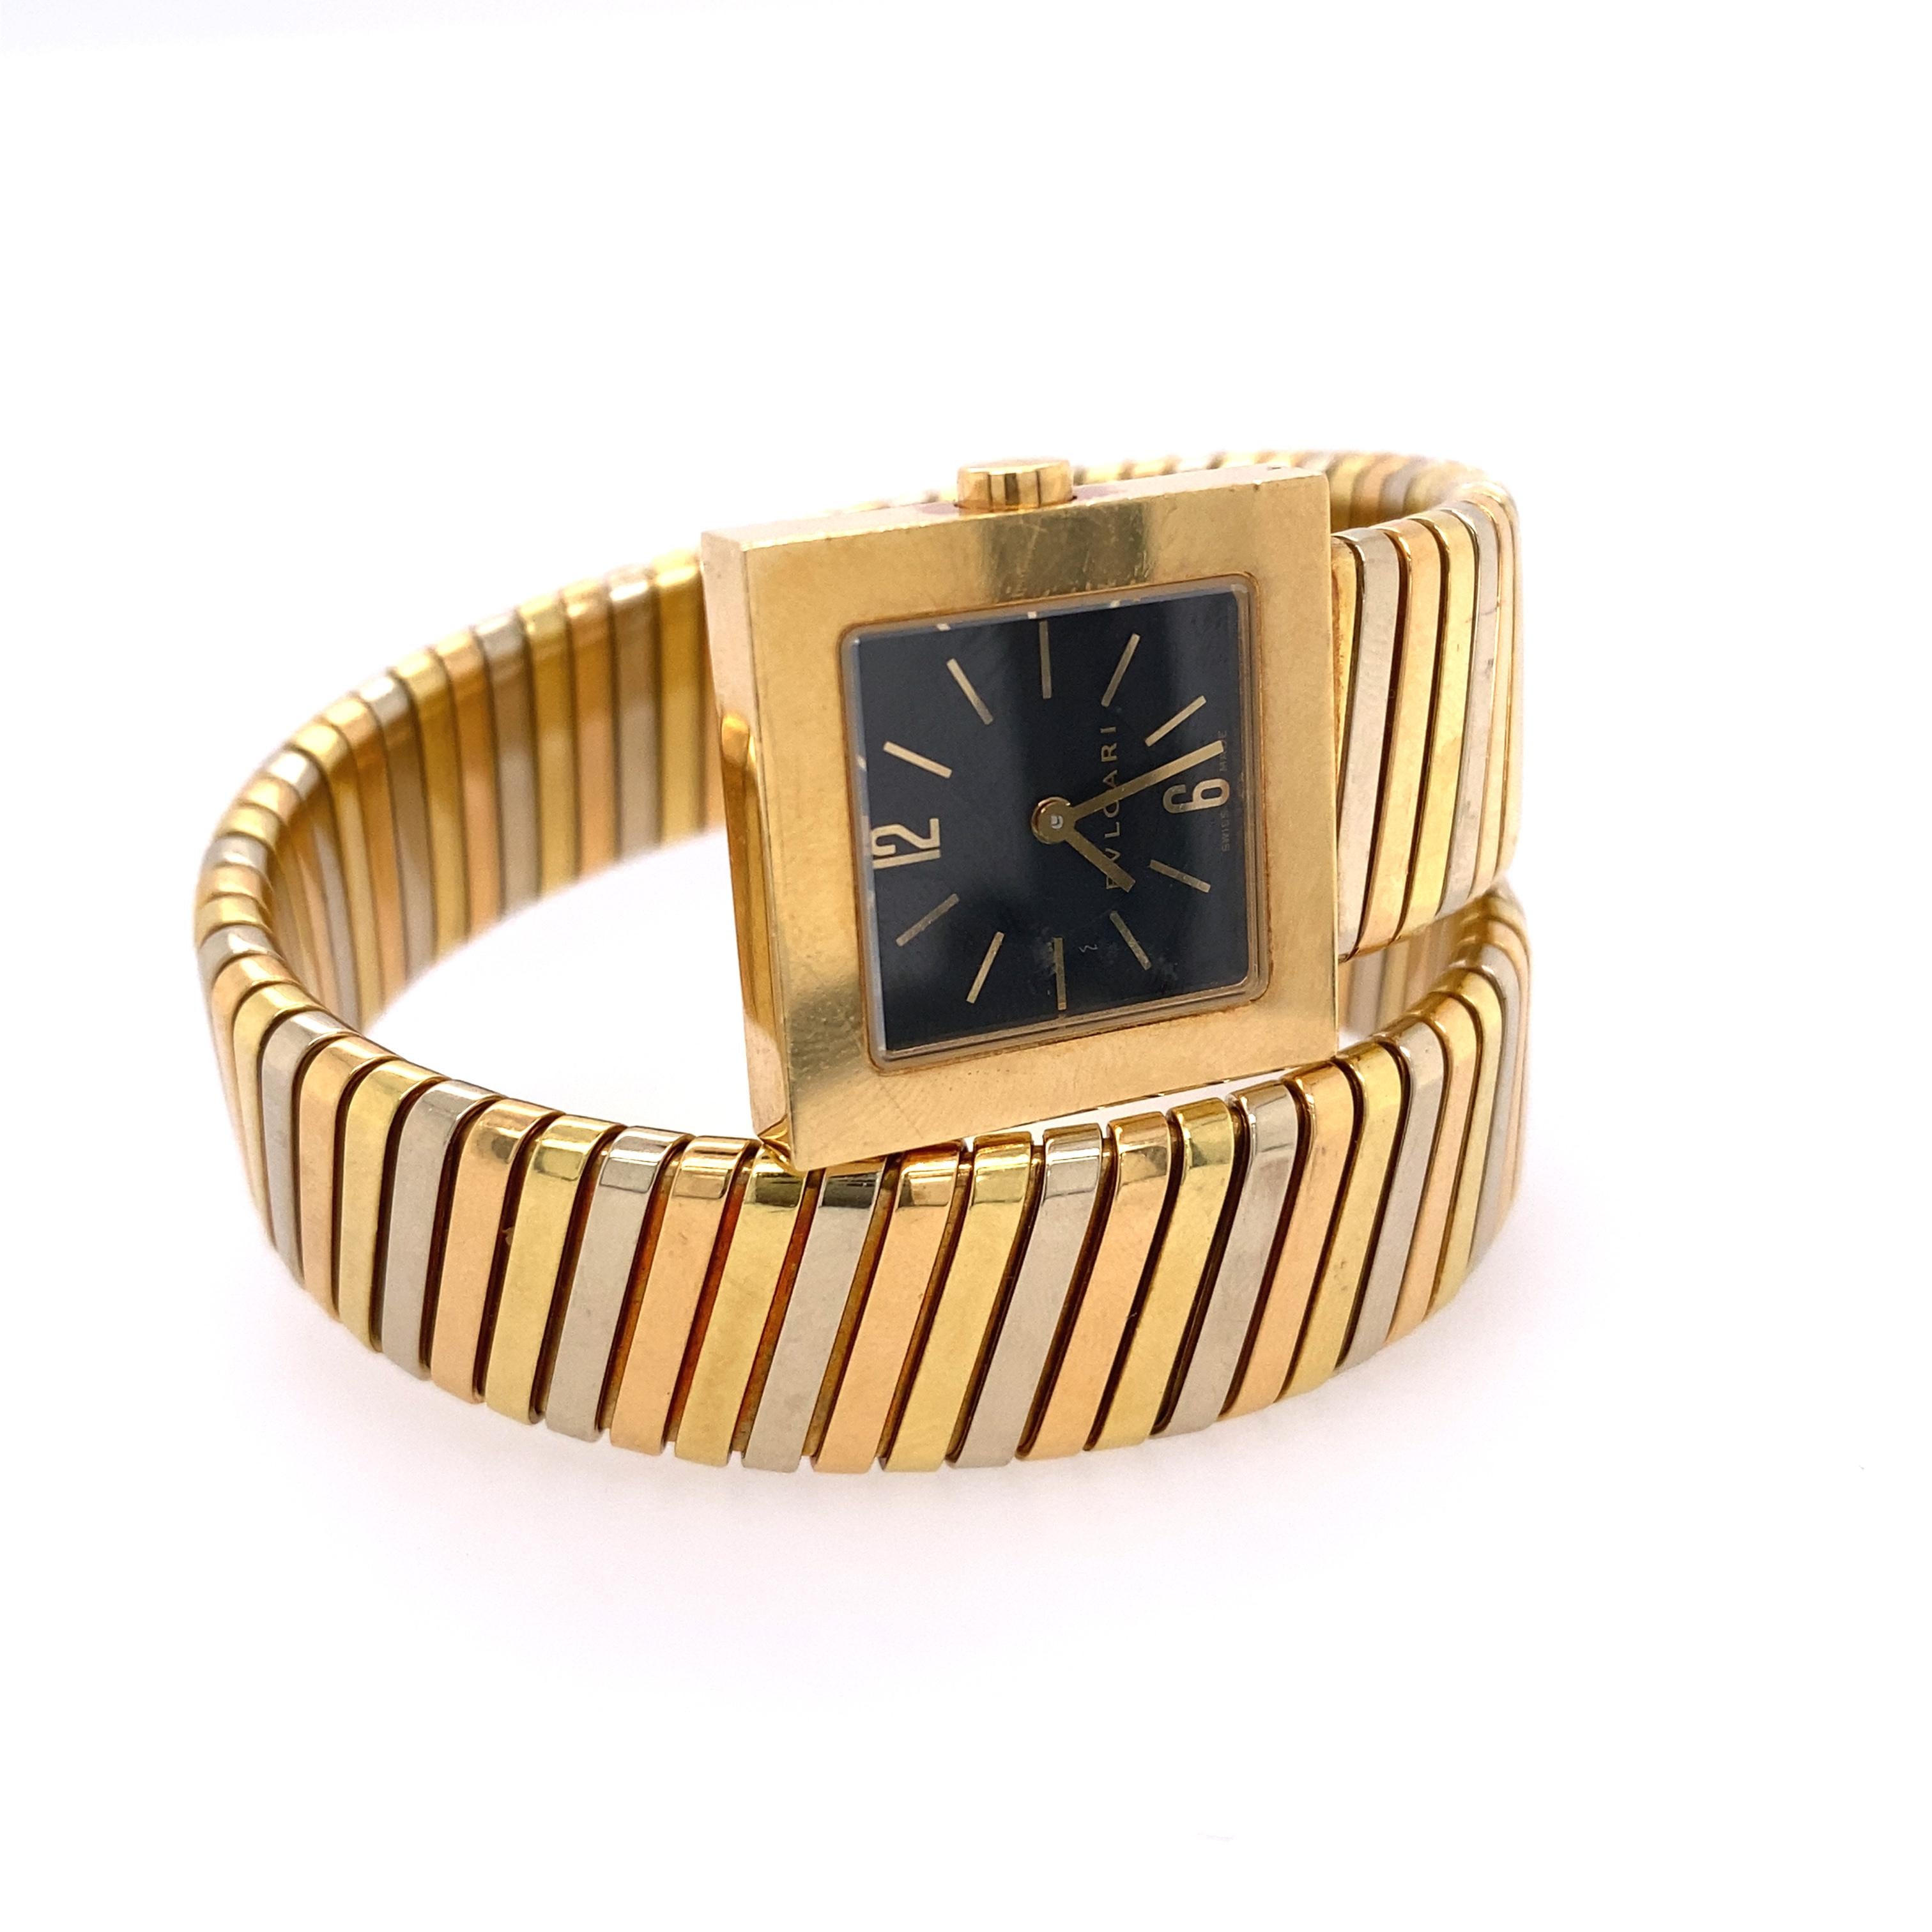 Classic 18k tri color gold wrap Tubogas bracelet watch by Bvlgari, with black dial and quartz movement. Bracelet will fit approx. 6.5-7 inches medium size average wrist.  Case measures 22 mm x 22mm. Ref. SQ 22 1T. Weight  75.3 dwt. 

